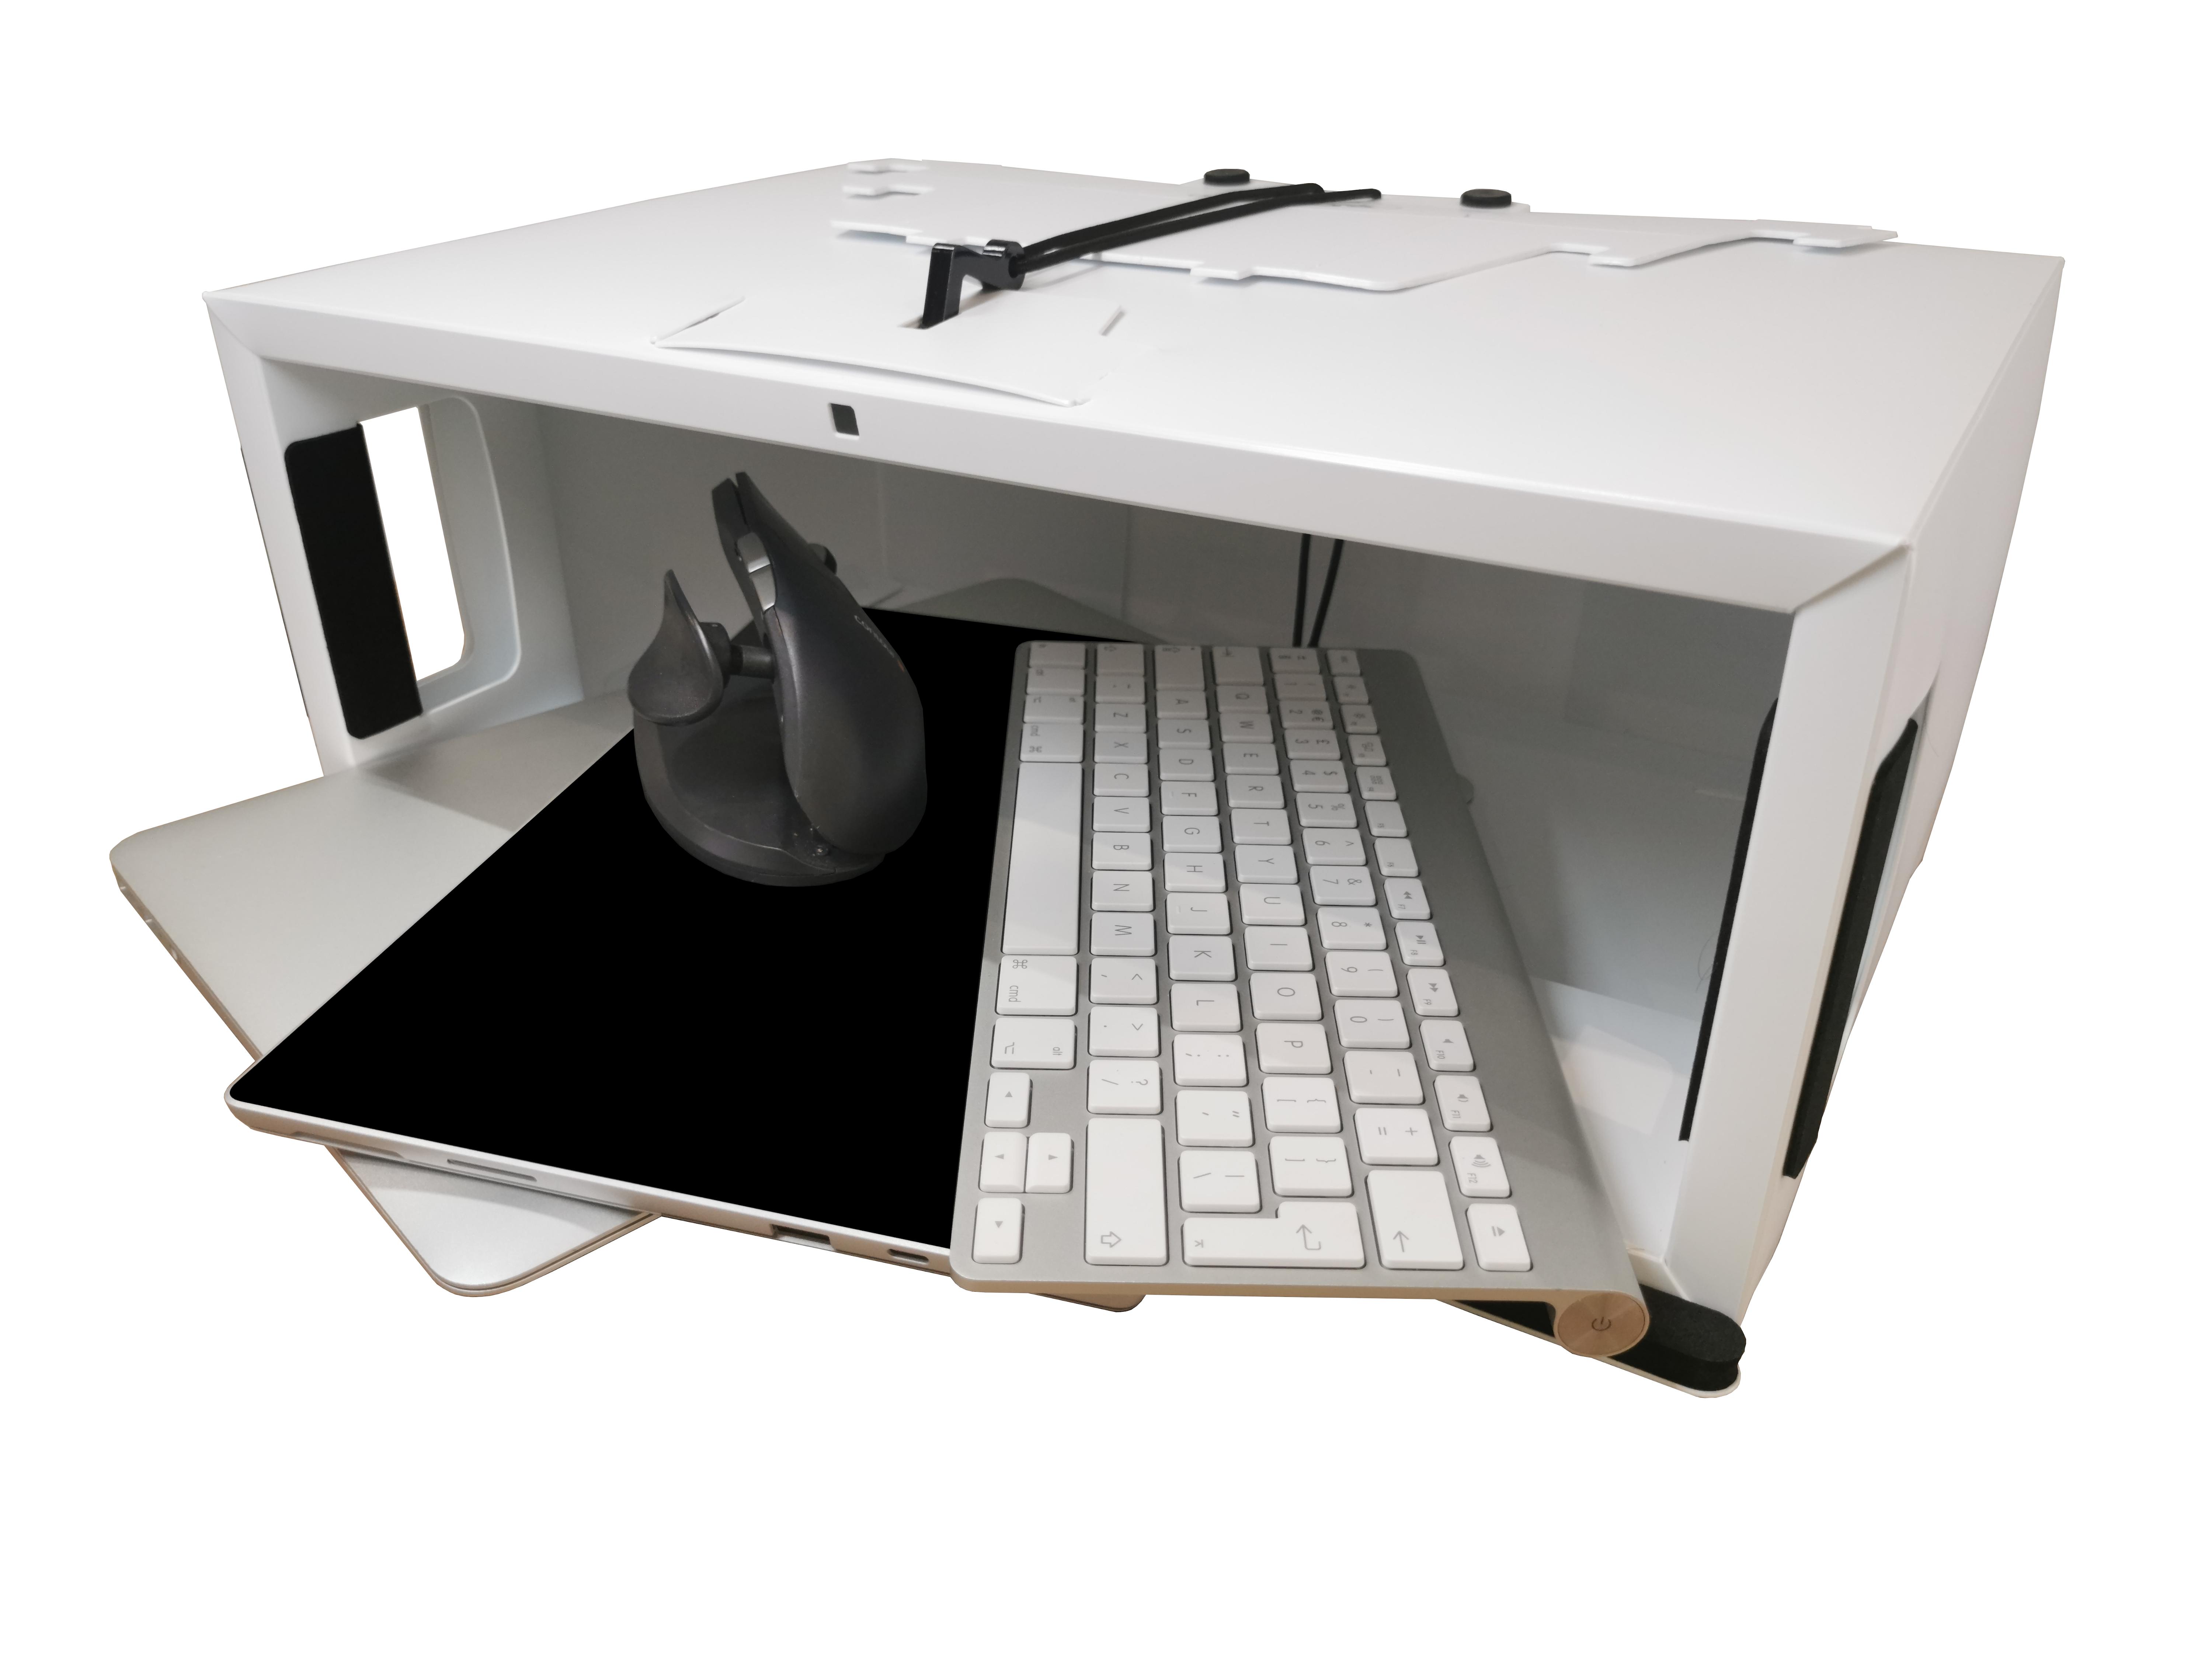 Box office pro with a keyboard and mouse being stored inside